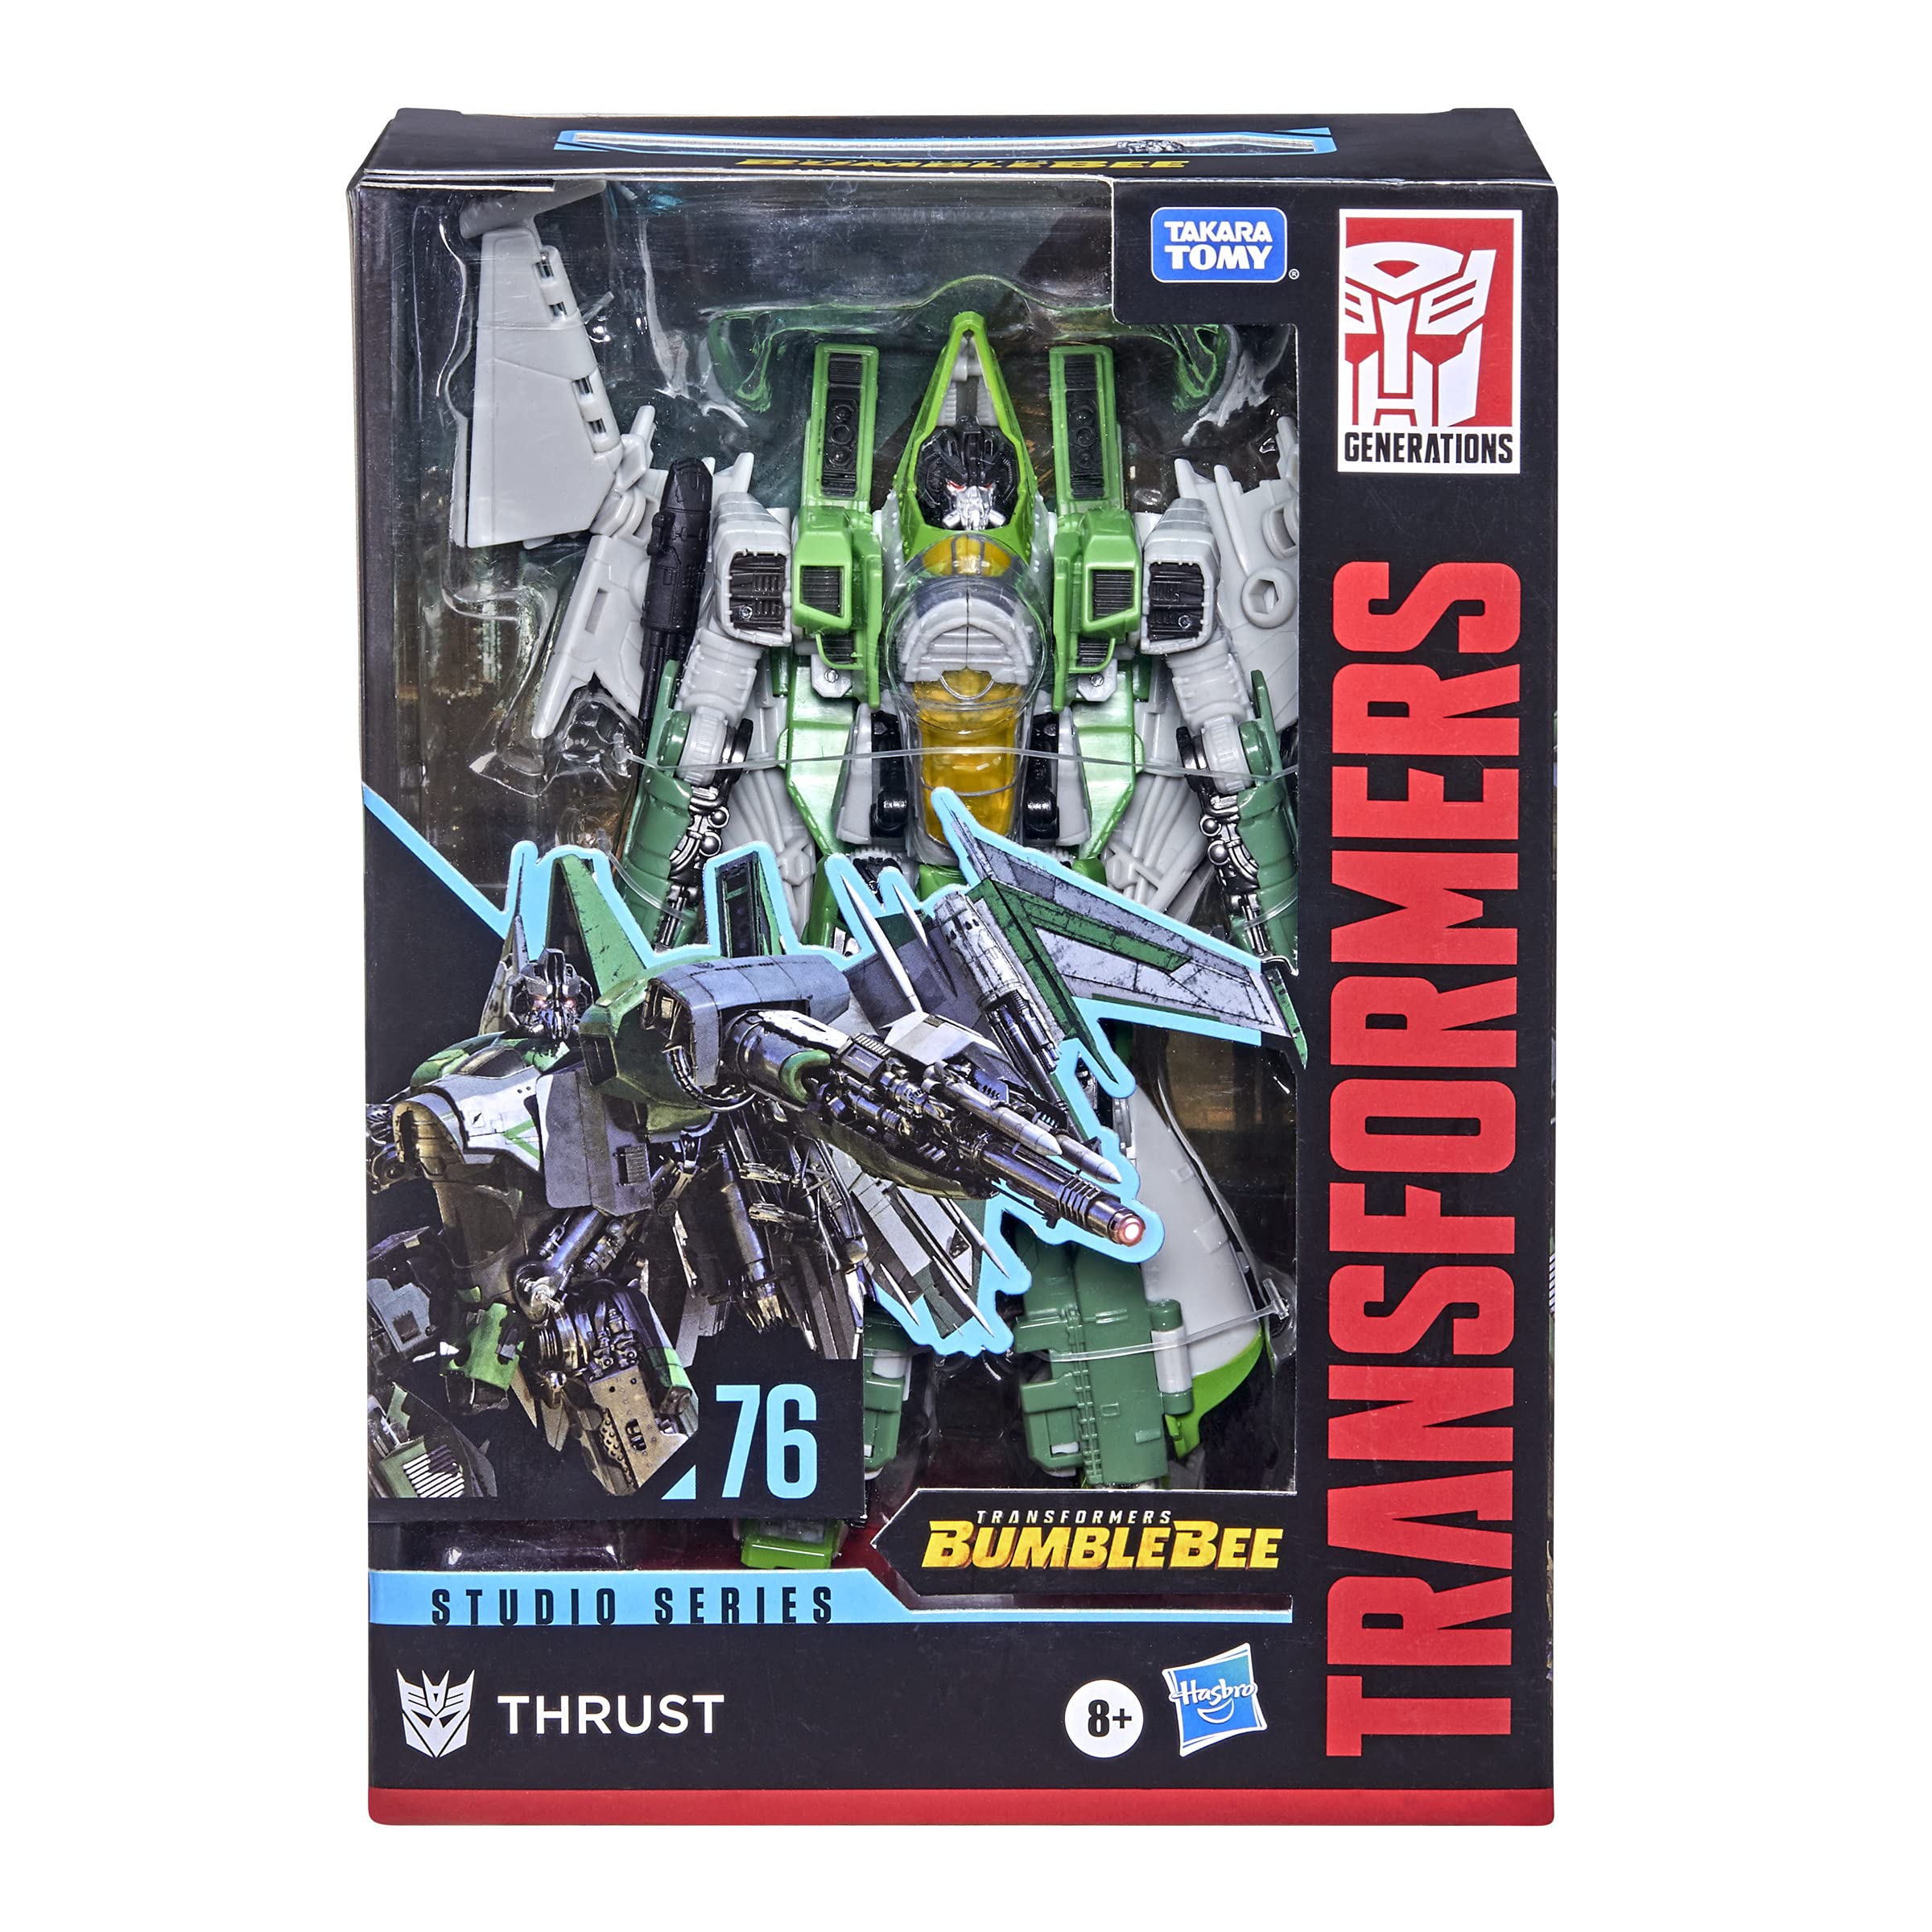 Transformers War for Cybertron: Grapple Action Figure, multipacks and more.  - $17.50 at Amazon